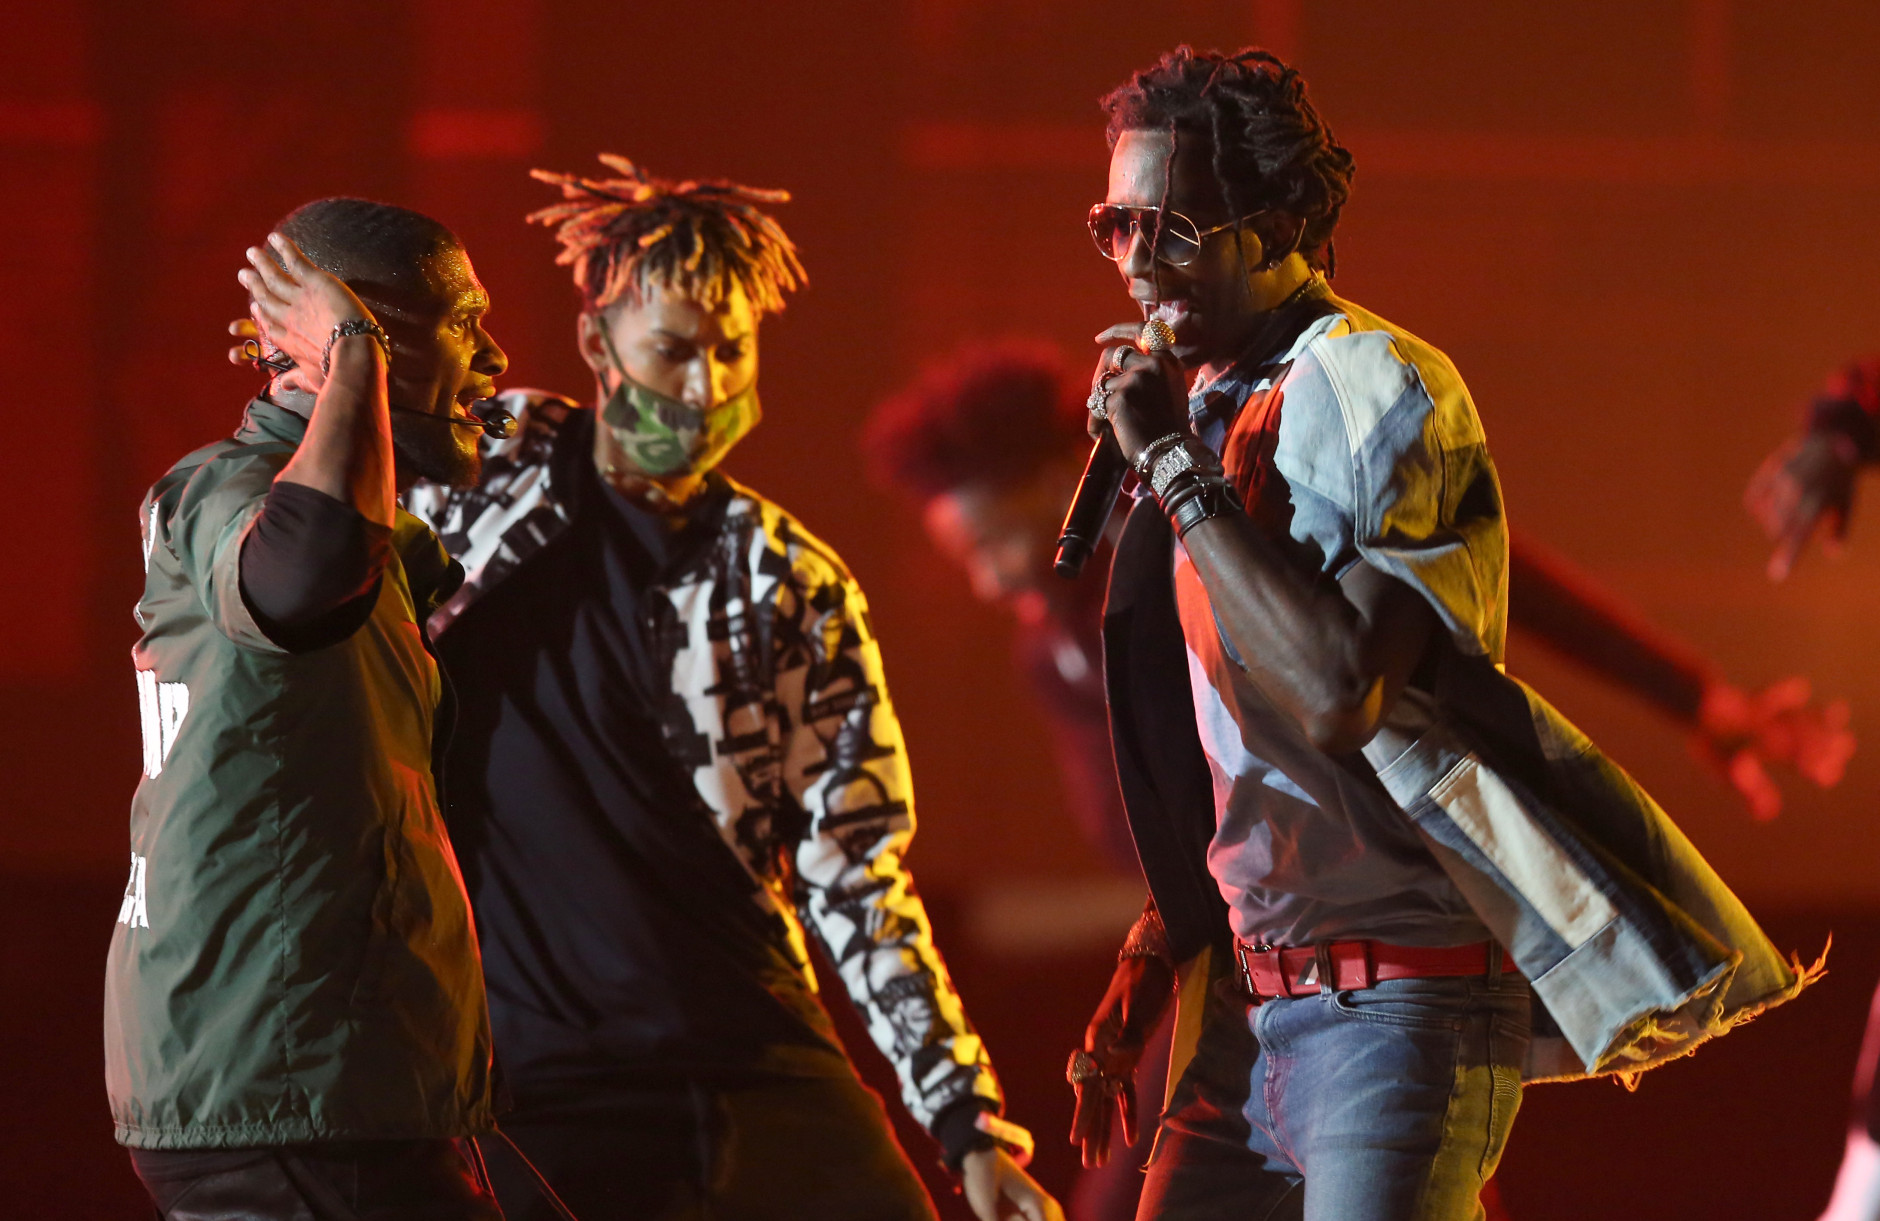 Usher, left, and Young Thug perform No Limit at the BET Awards at the Microsoft Theater on Sunday, June 26, 2016, in Los Angeles. (Photo by Matt Sayles/Invision/AP)